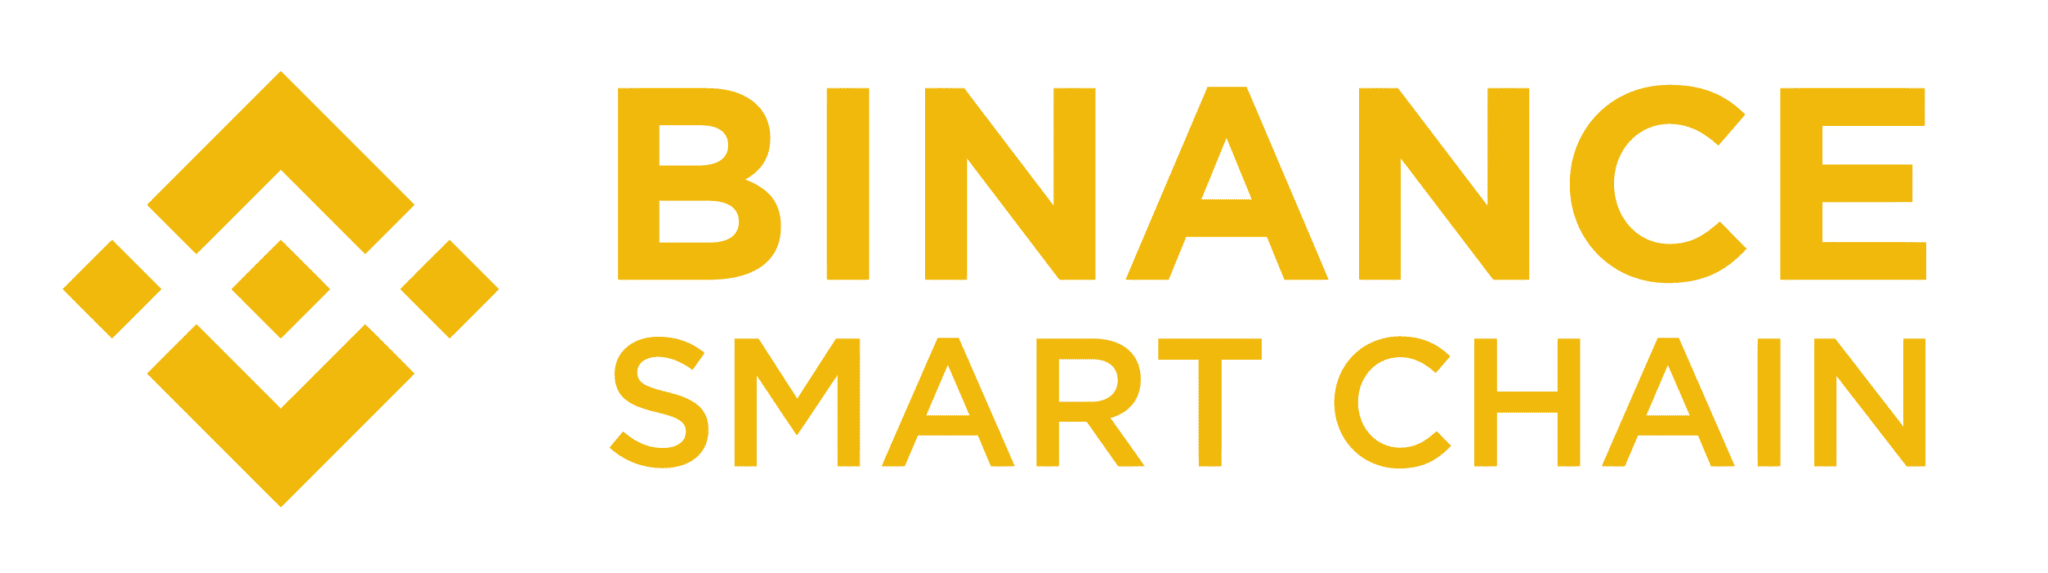 Why was binance smart chain launched?